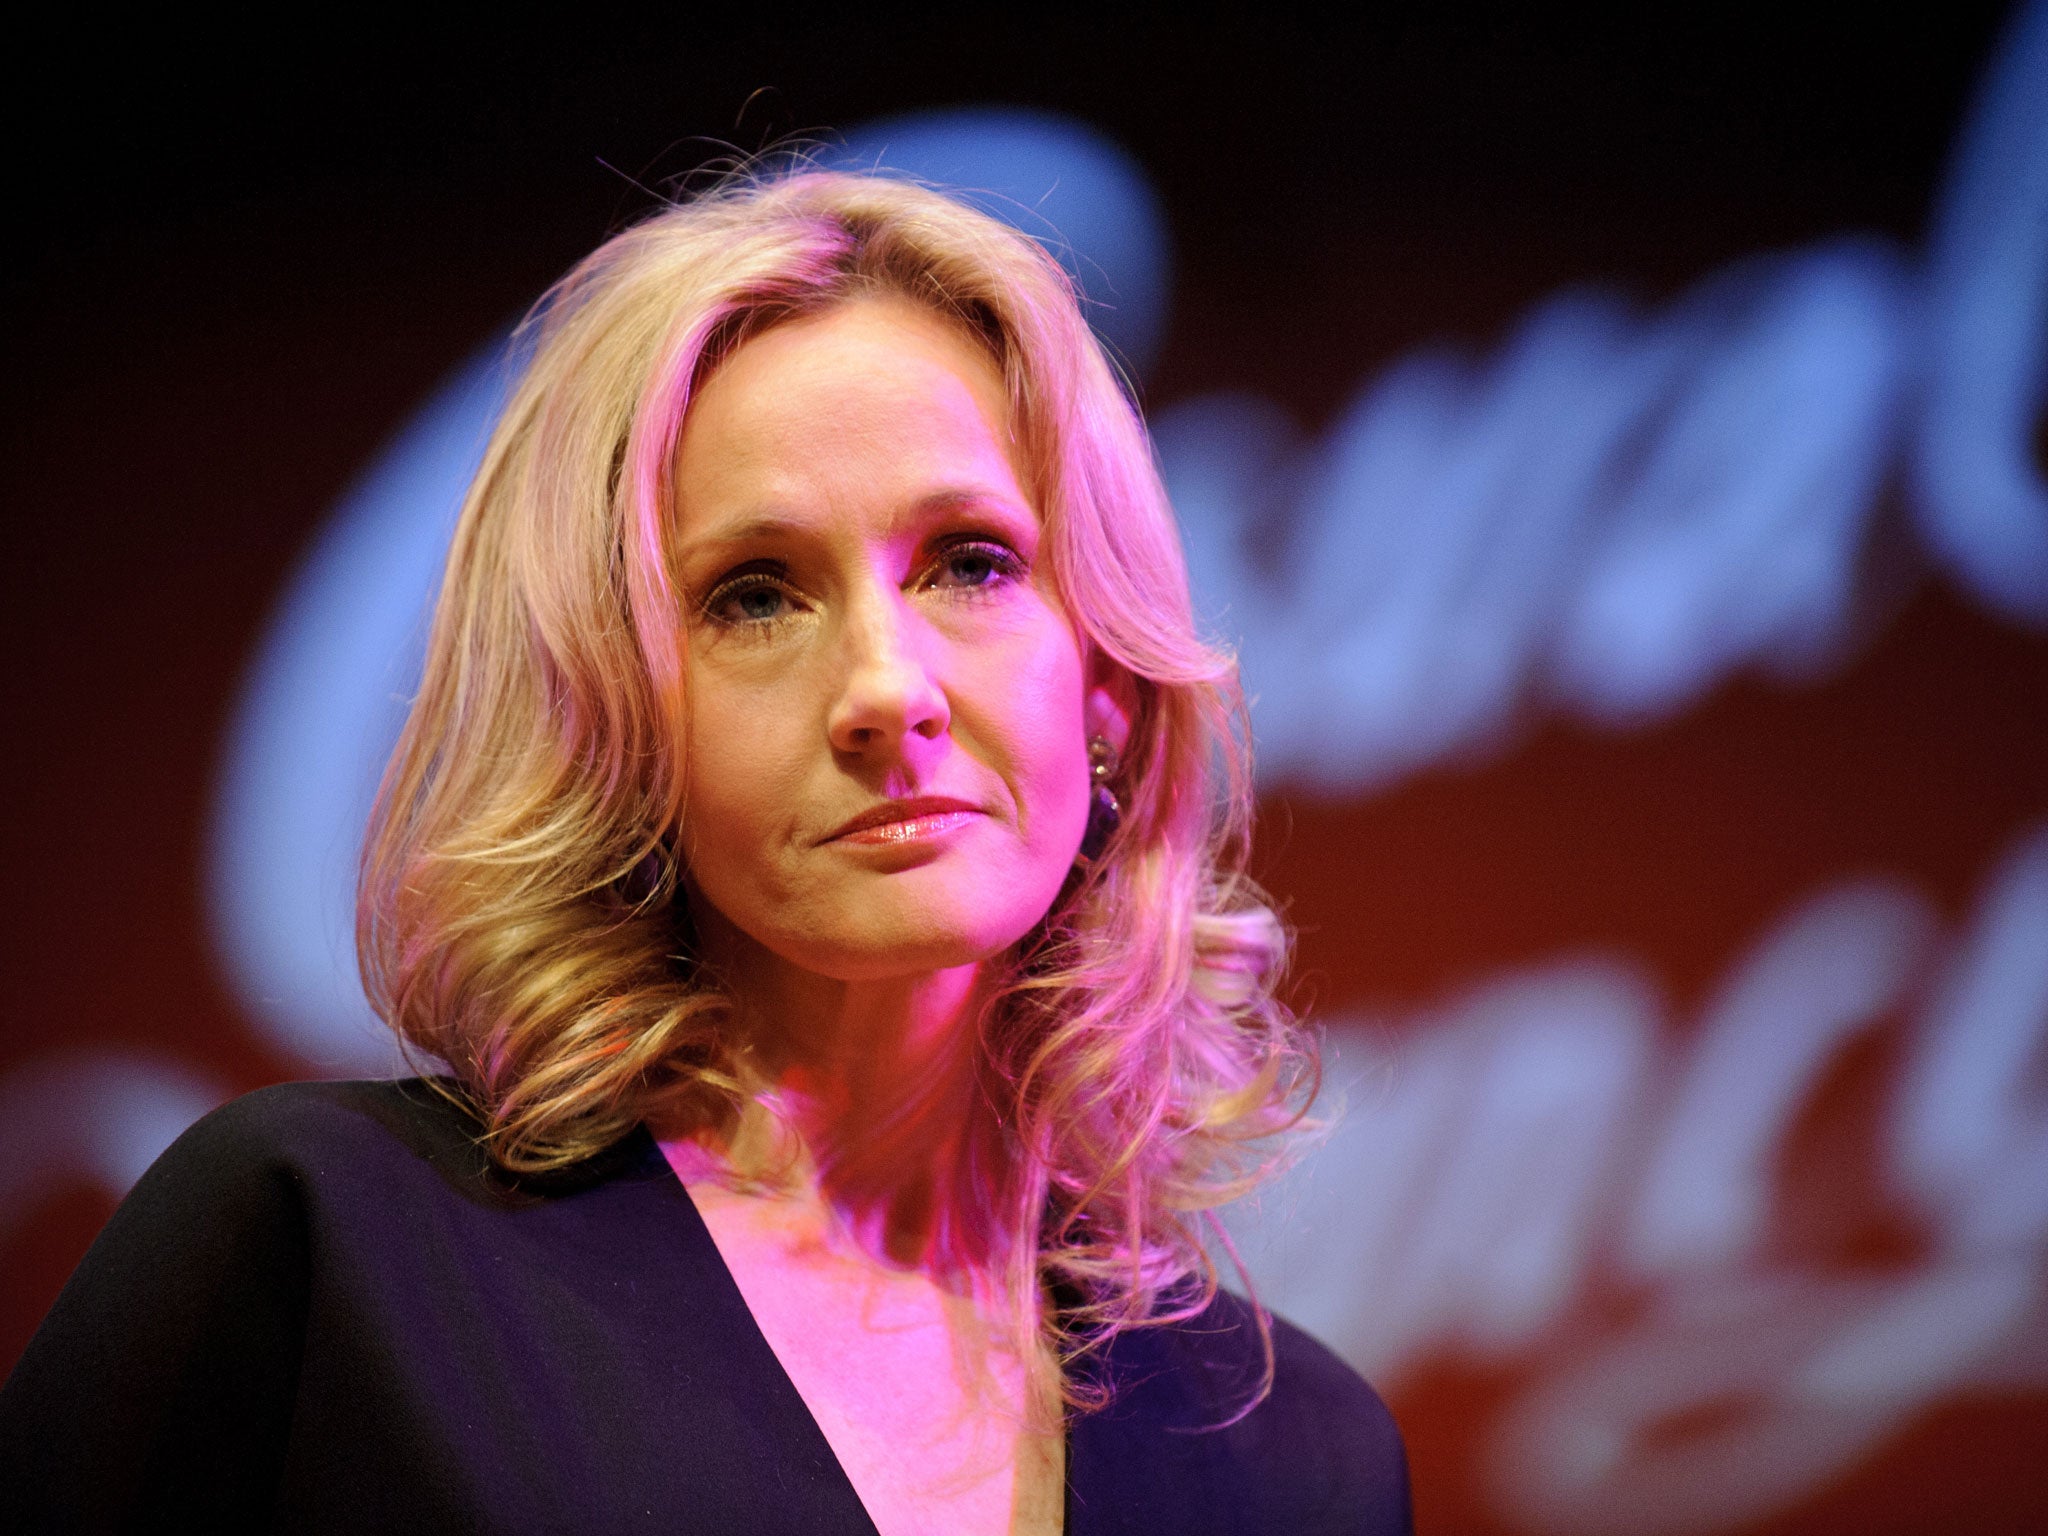 JK Rowling has donated £1 million to the Better Together campaign